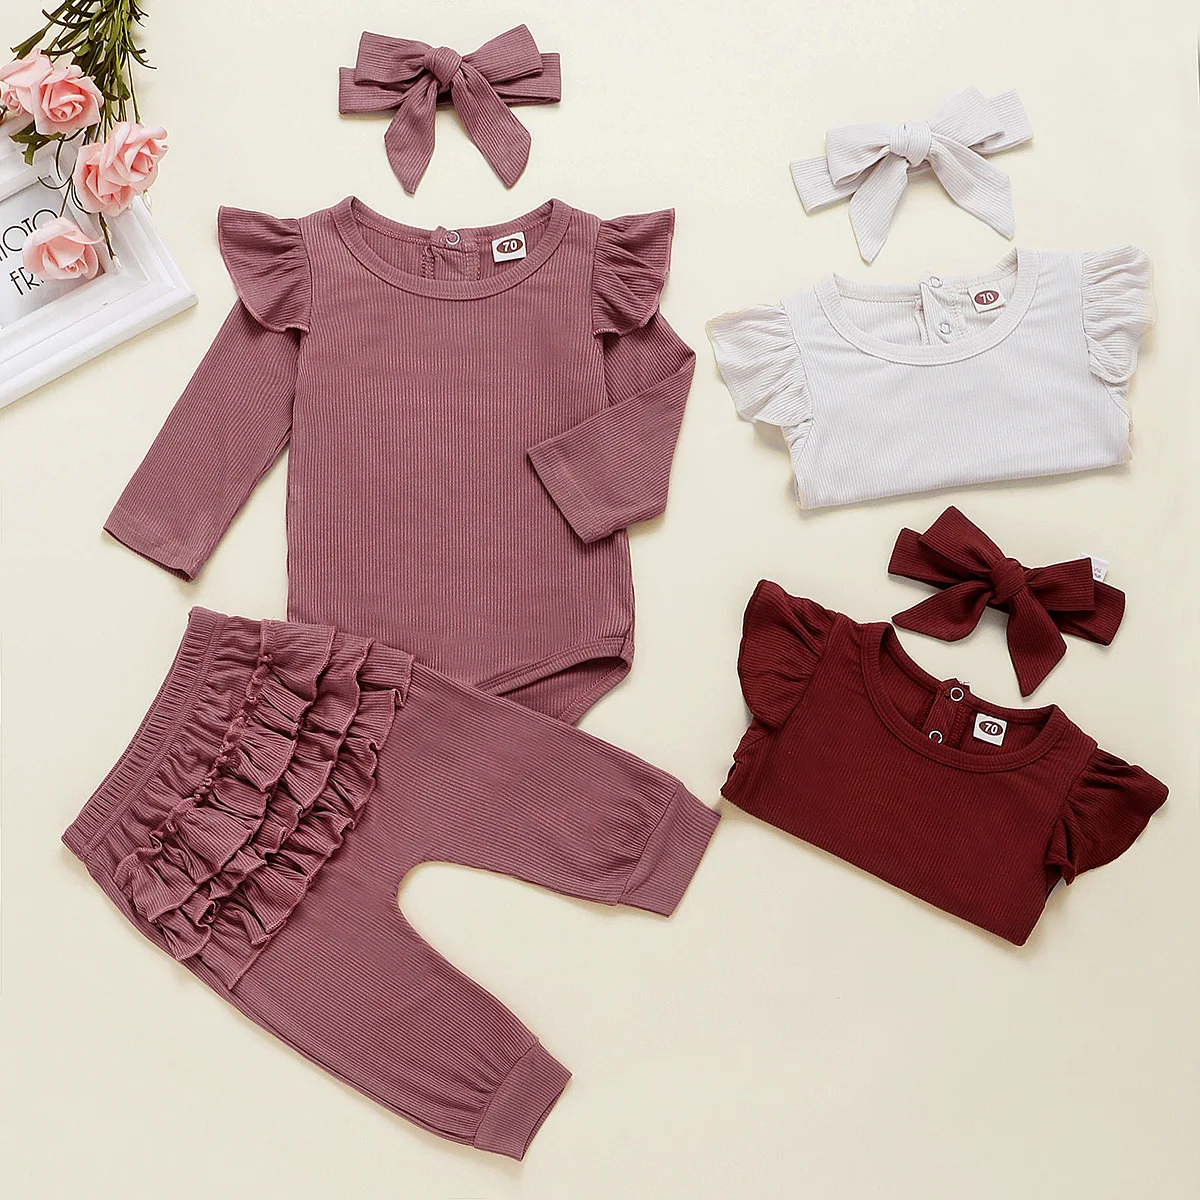 

Newborn Baby Girl Ruffles Outfits Infant Ribbed Cotton Bodysuit Pants Leggings Headband 3PCS Baby Clothing Sets Clothes, Photo showed and customized color